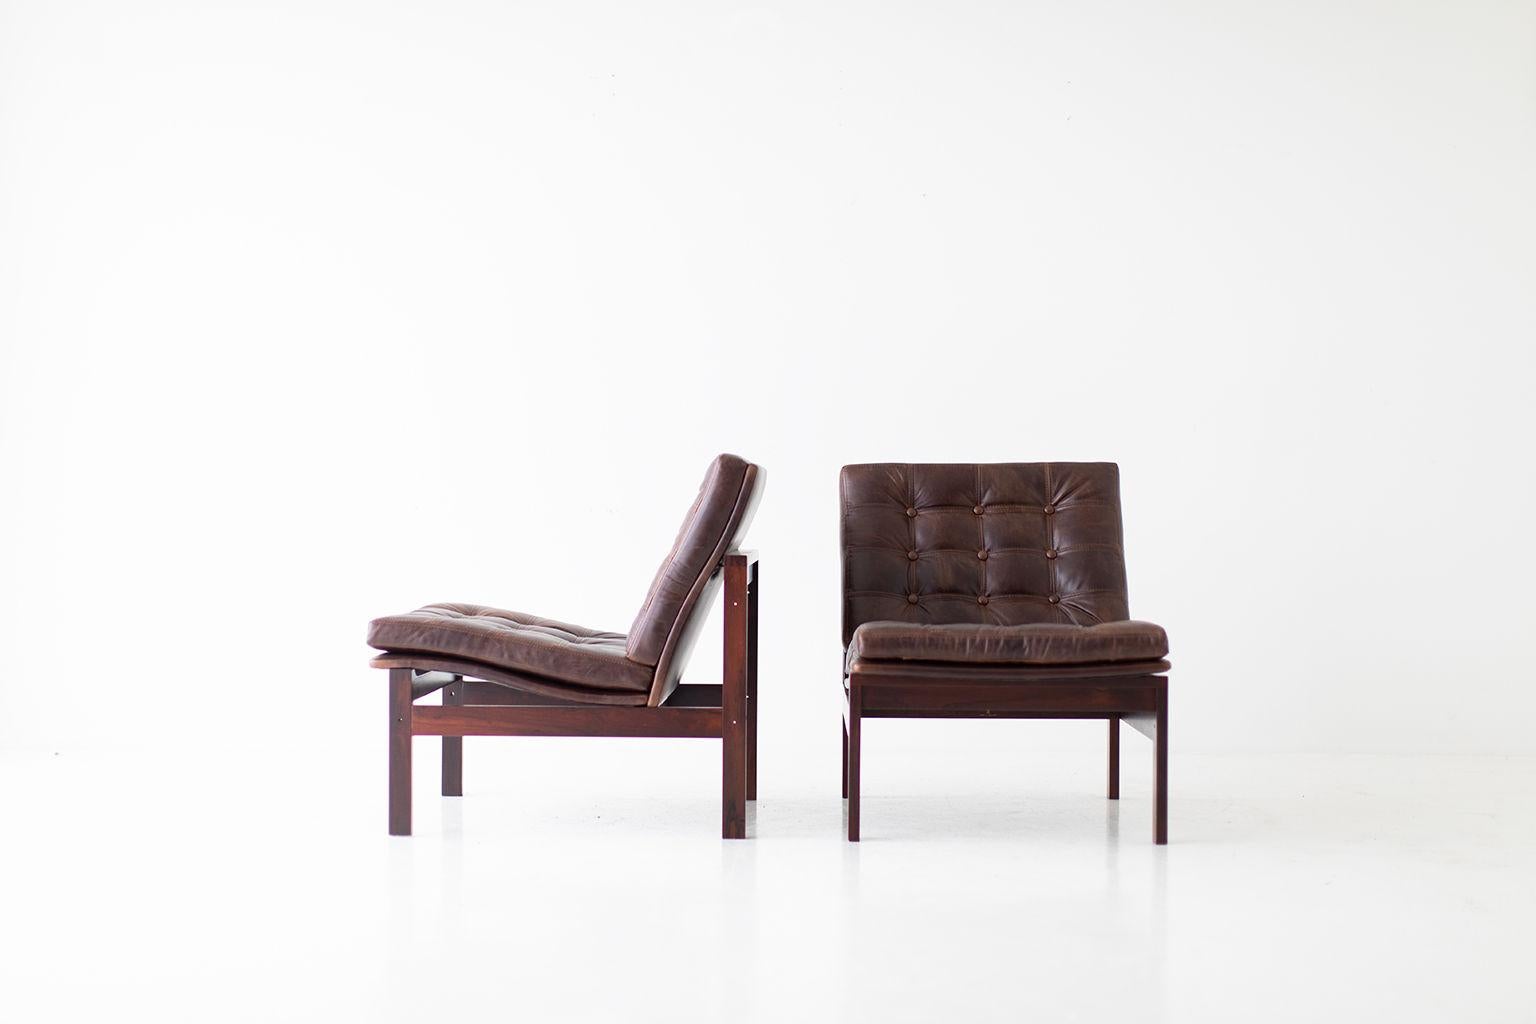 Designer: Ole Gjerløv Knudsen & Torben Lind.

Manufacturer: France and Sons.
Period/Model: Mid-Century Modern.
Specs: Rosewood, leather.

Condition:

These Ole Gjerløv Knudsen & Torben Lind rosewood and leather lounge chairs are in excellent